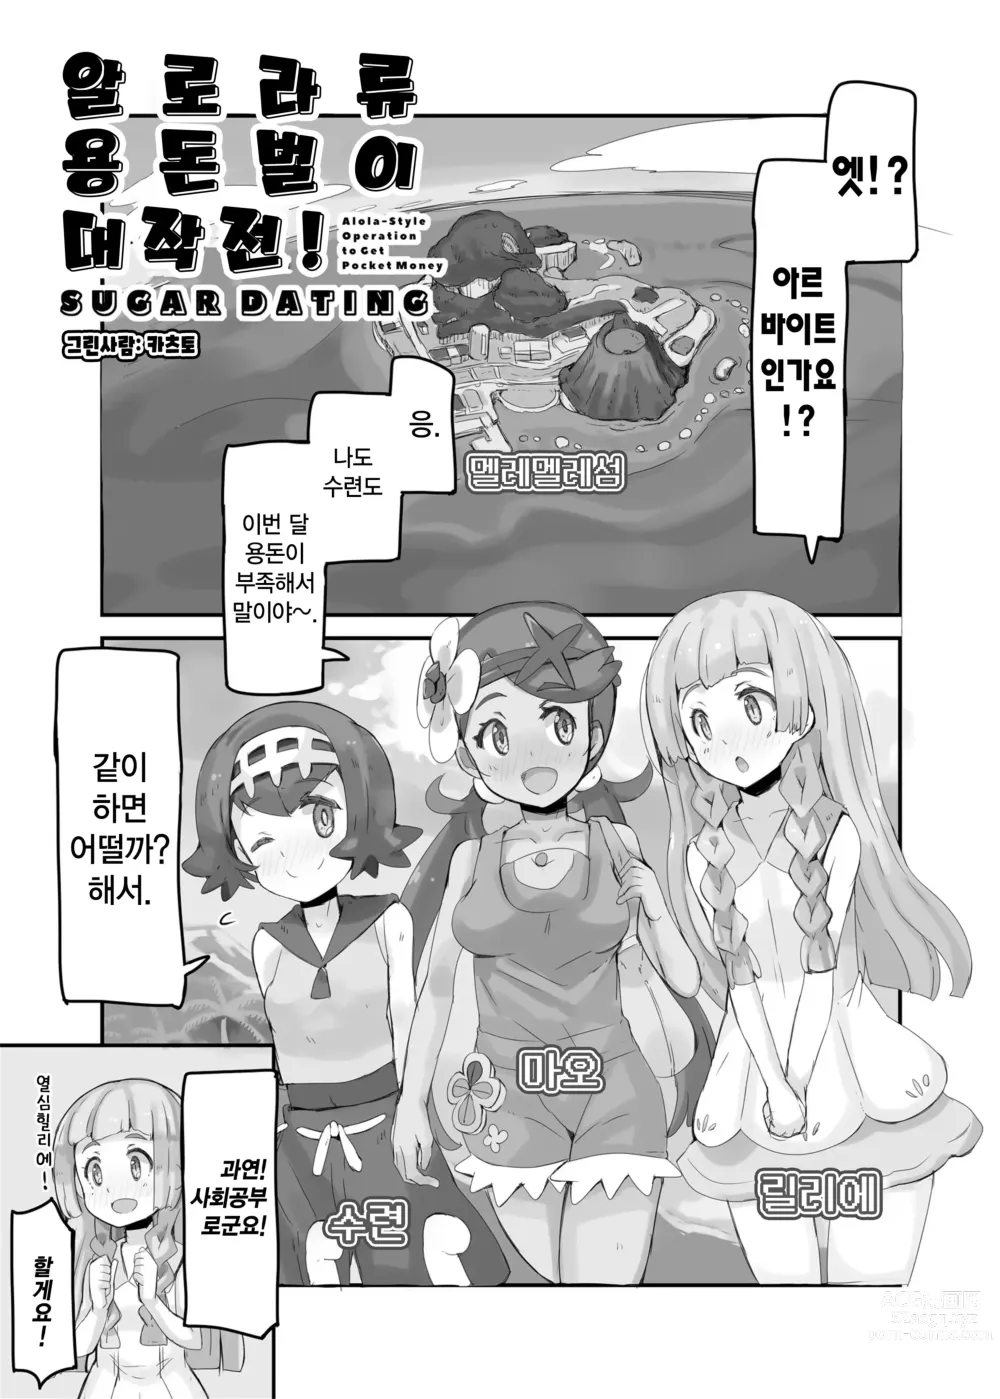 Page 5 of doujinshi 알로라류 용돈벌이 대작전!